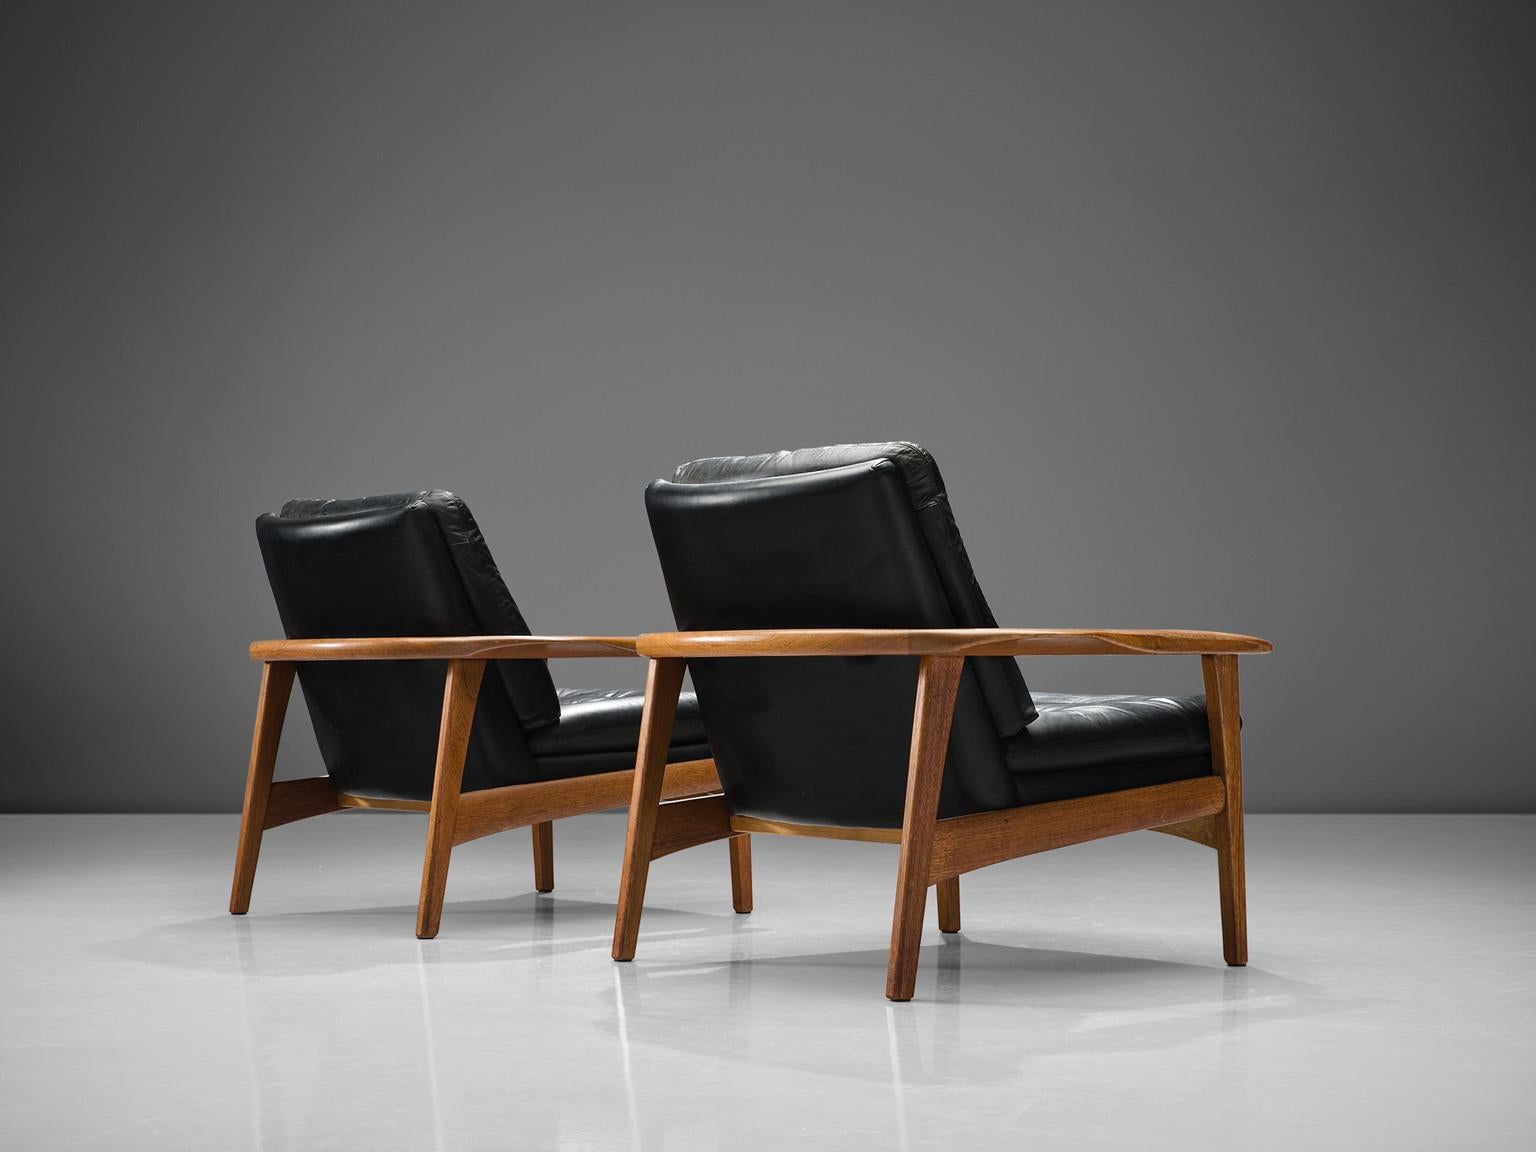 Scandinavian Modern Pair of Easy Chairs in Black Leather and Teak, Denmark, 1960s